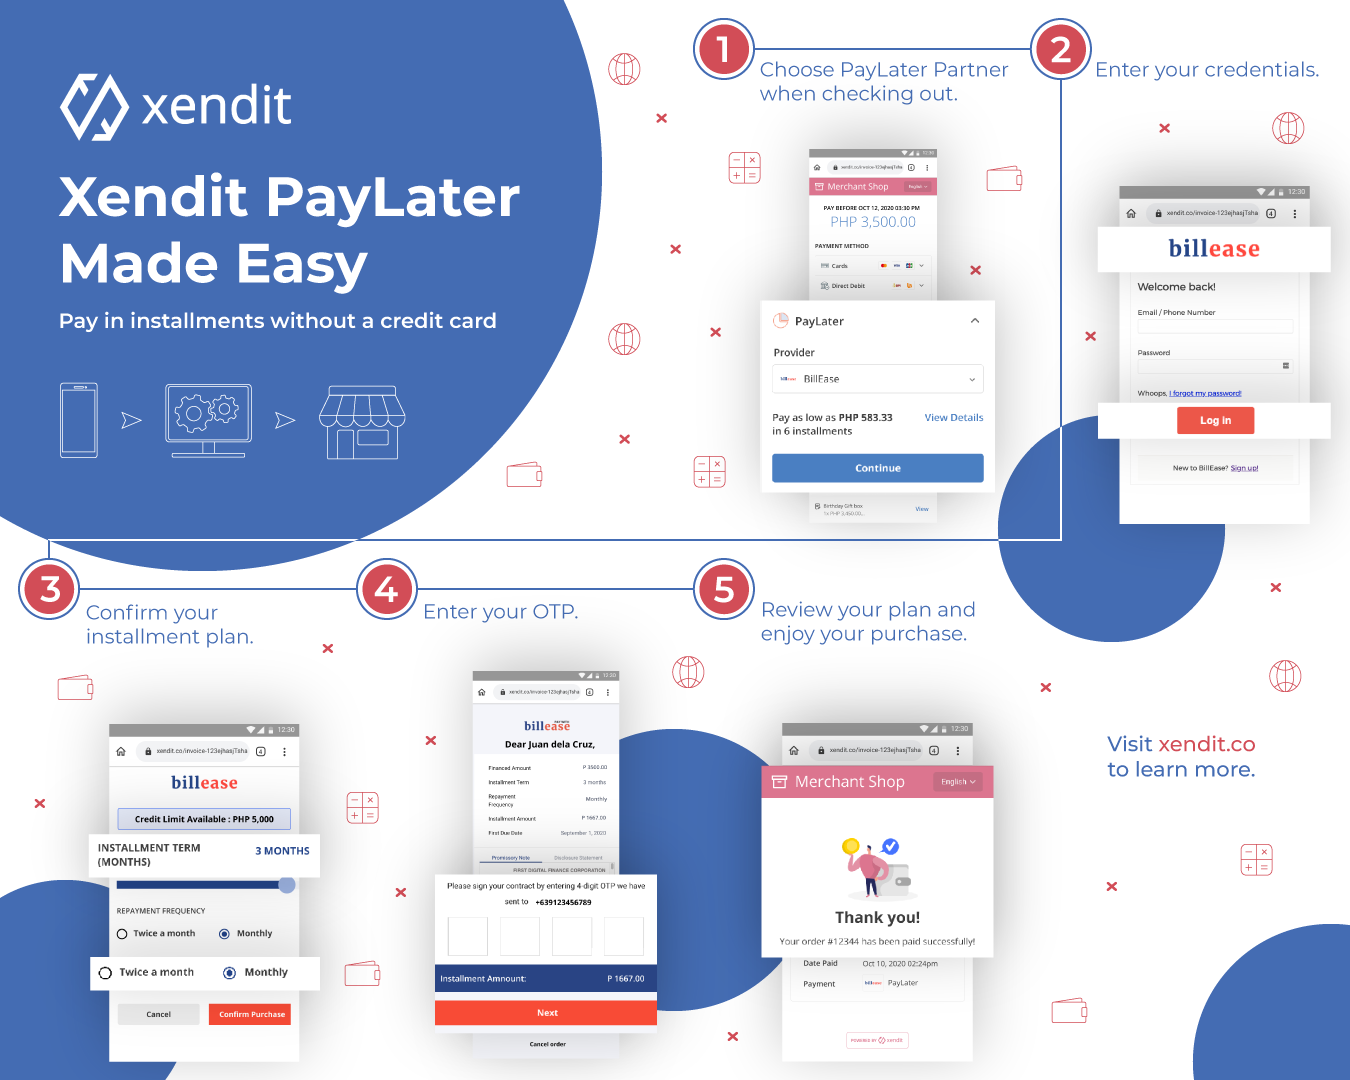 Xendit PayLater works with fintech partners to enable store financing for online businesses